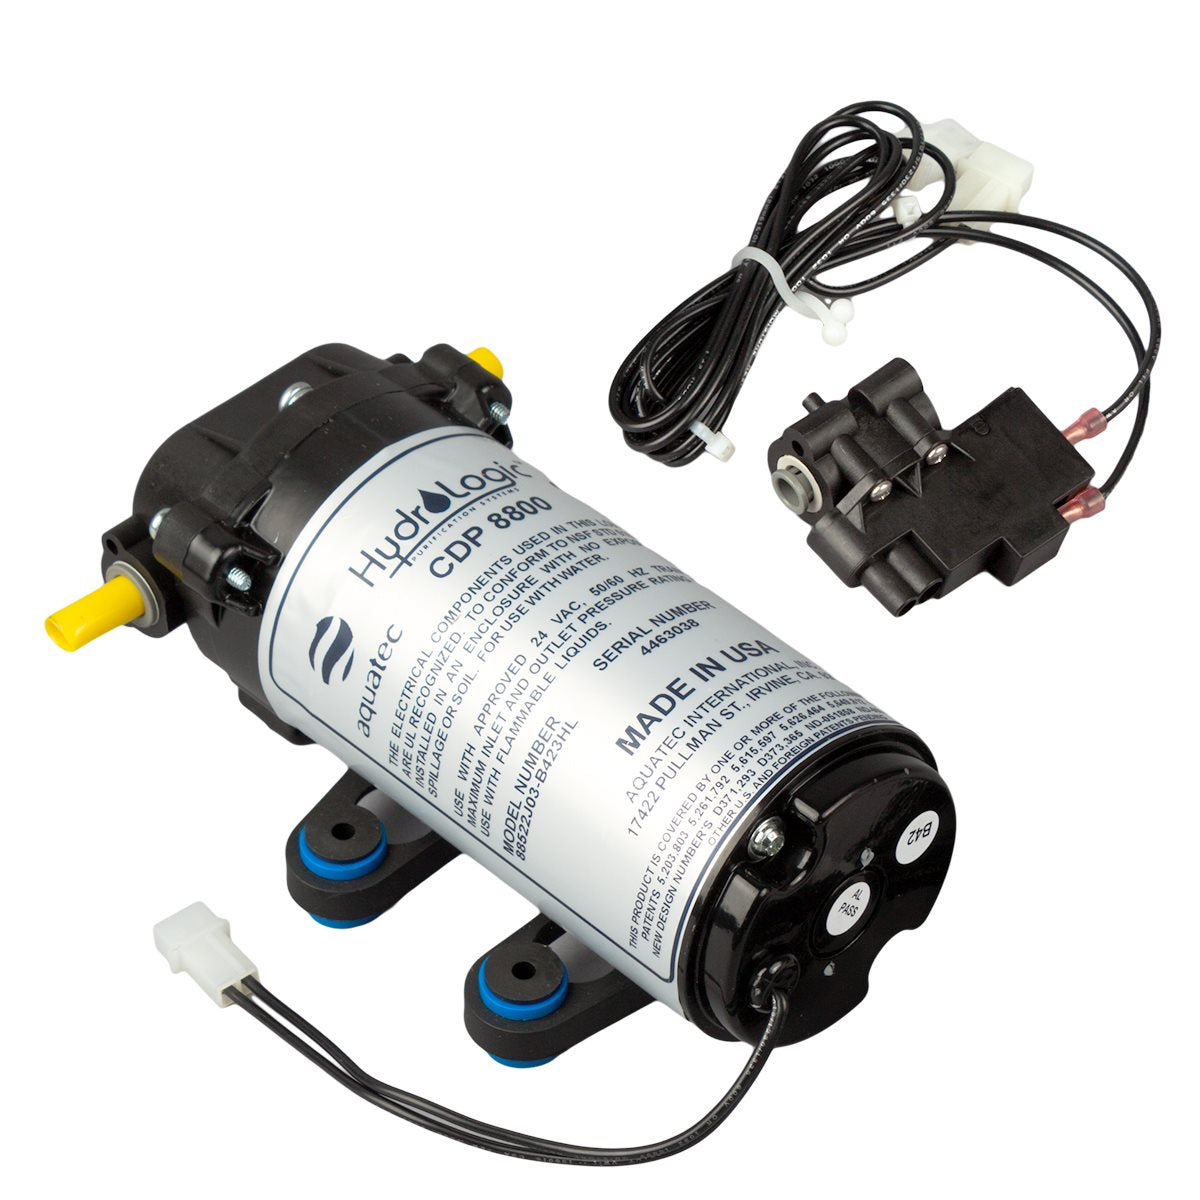 Product Image:Hydro-Logic 110V Pressure Booster Pump for Stealth